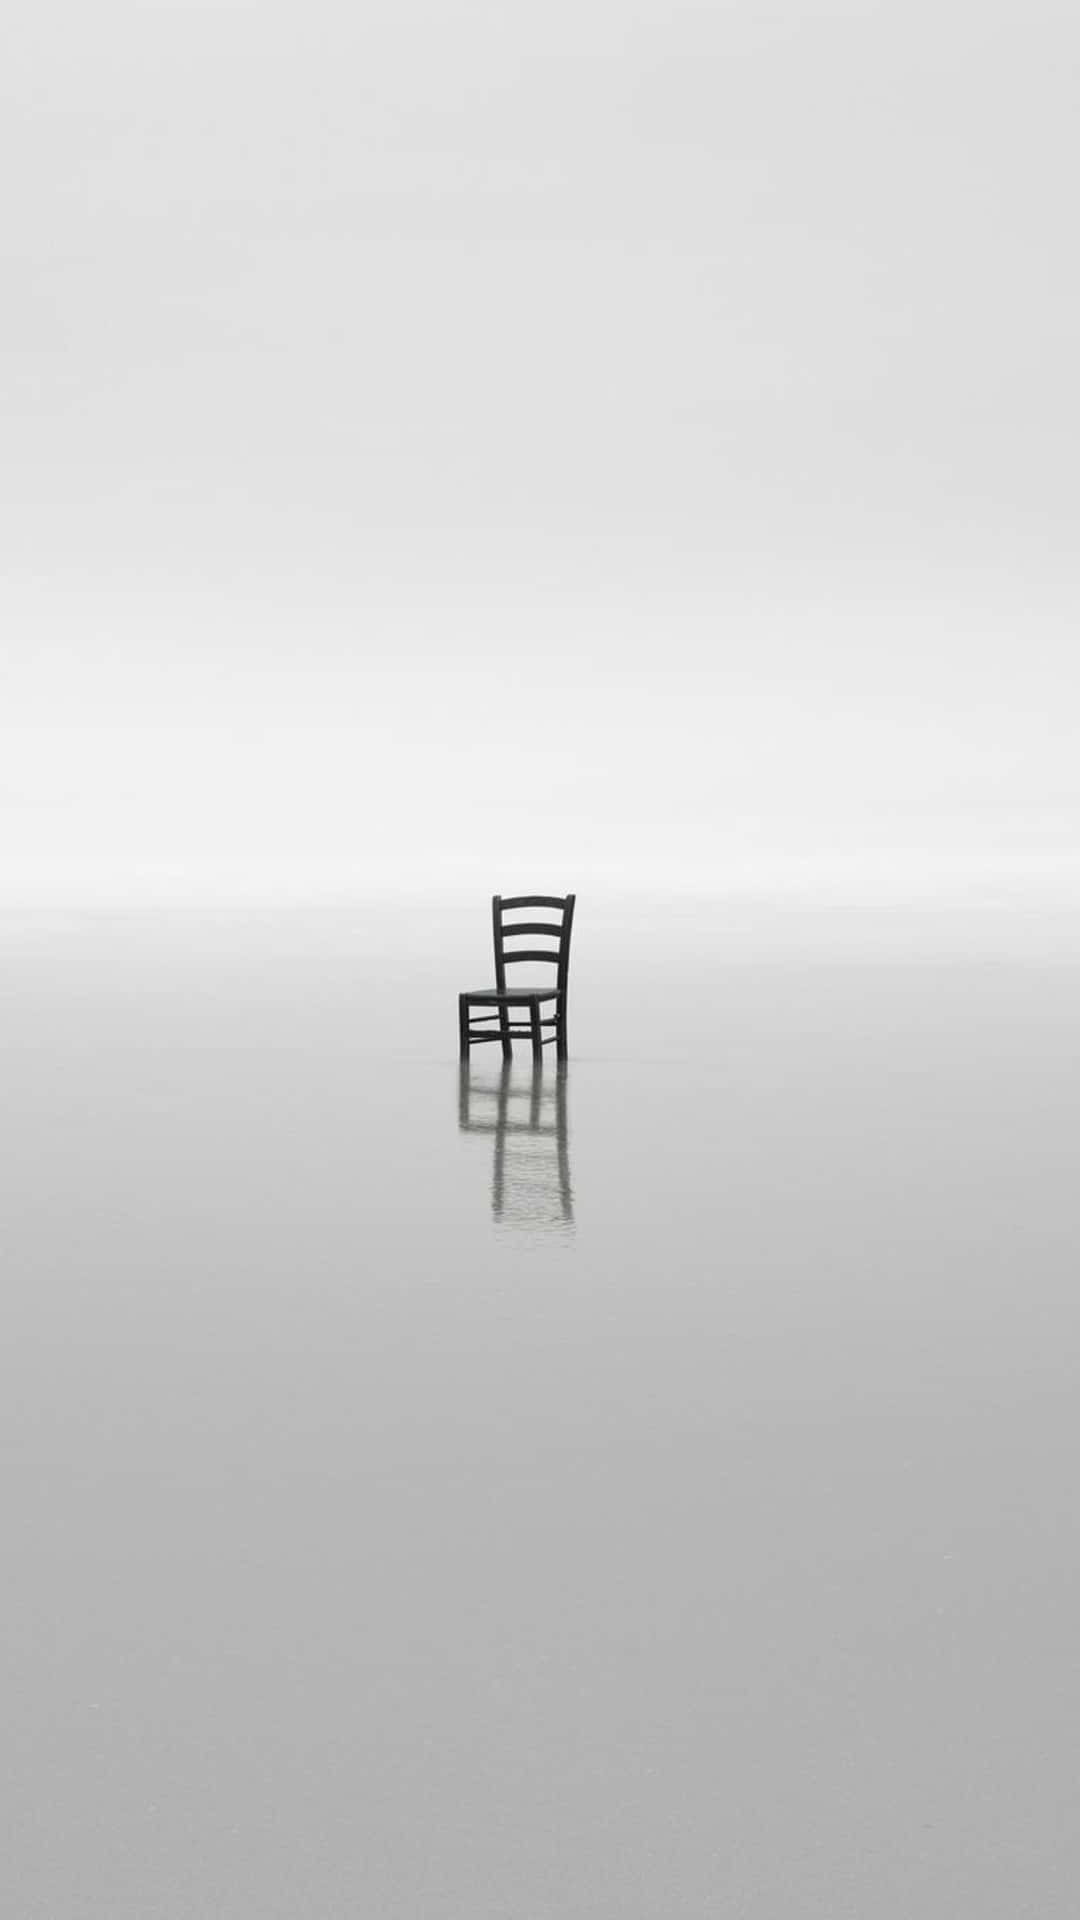 Wooden Chair In White Minimalist Aesthetic Wallpaper